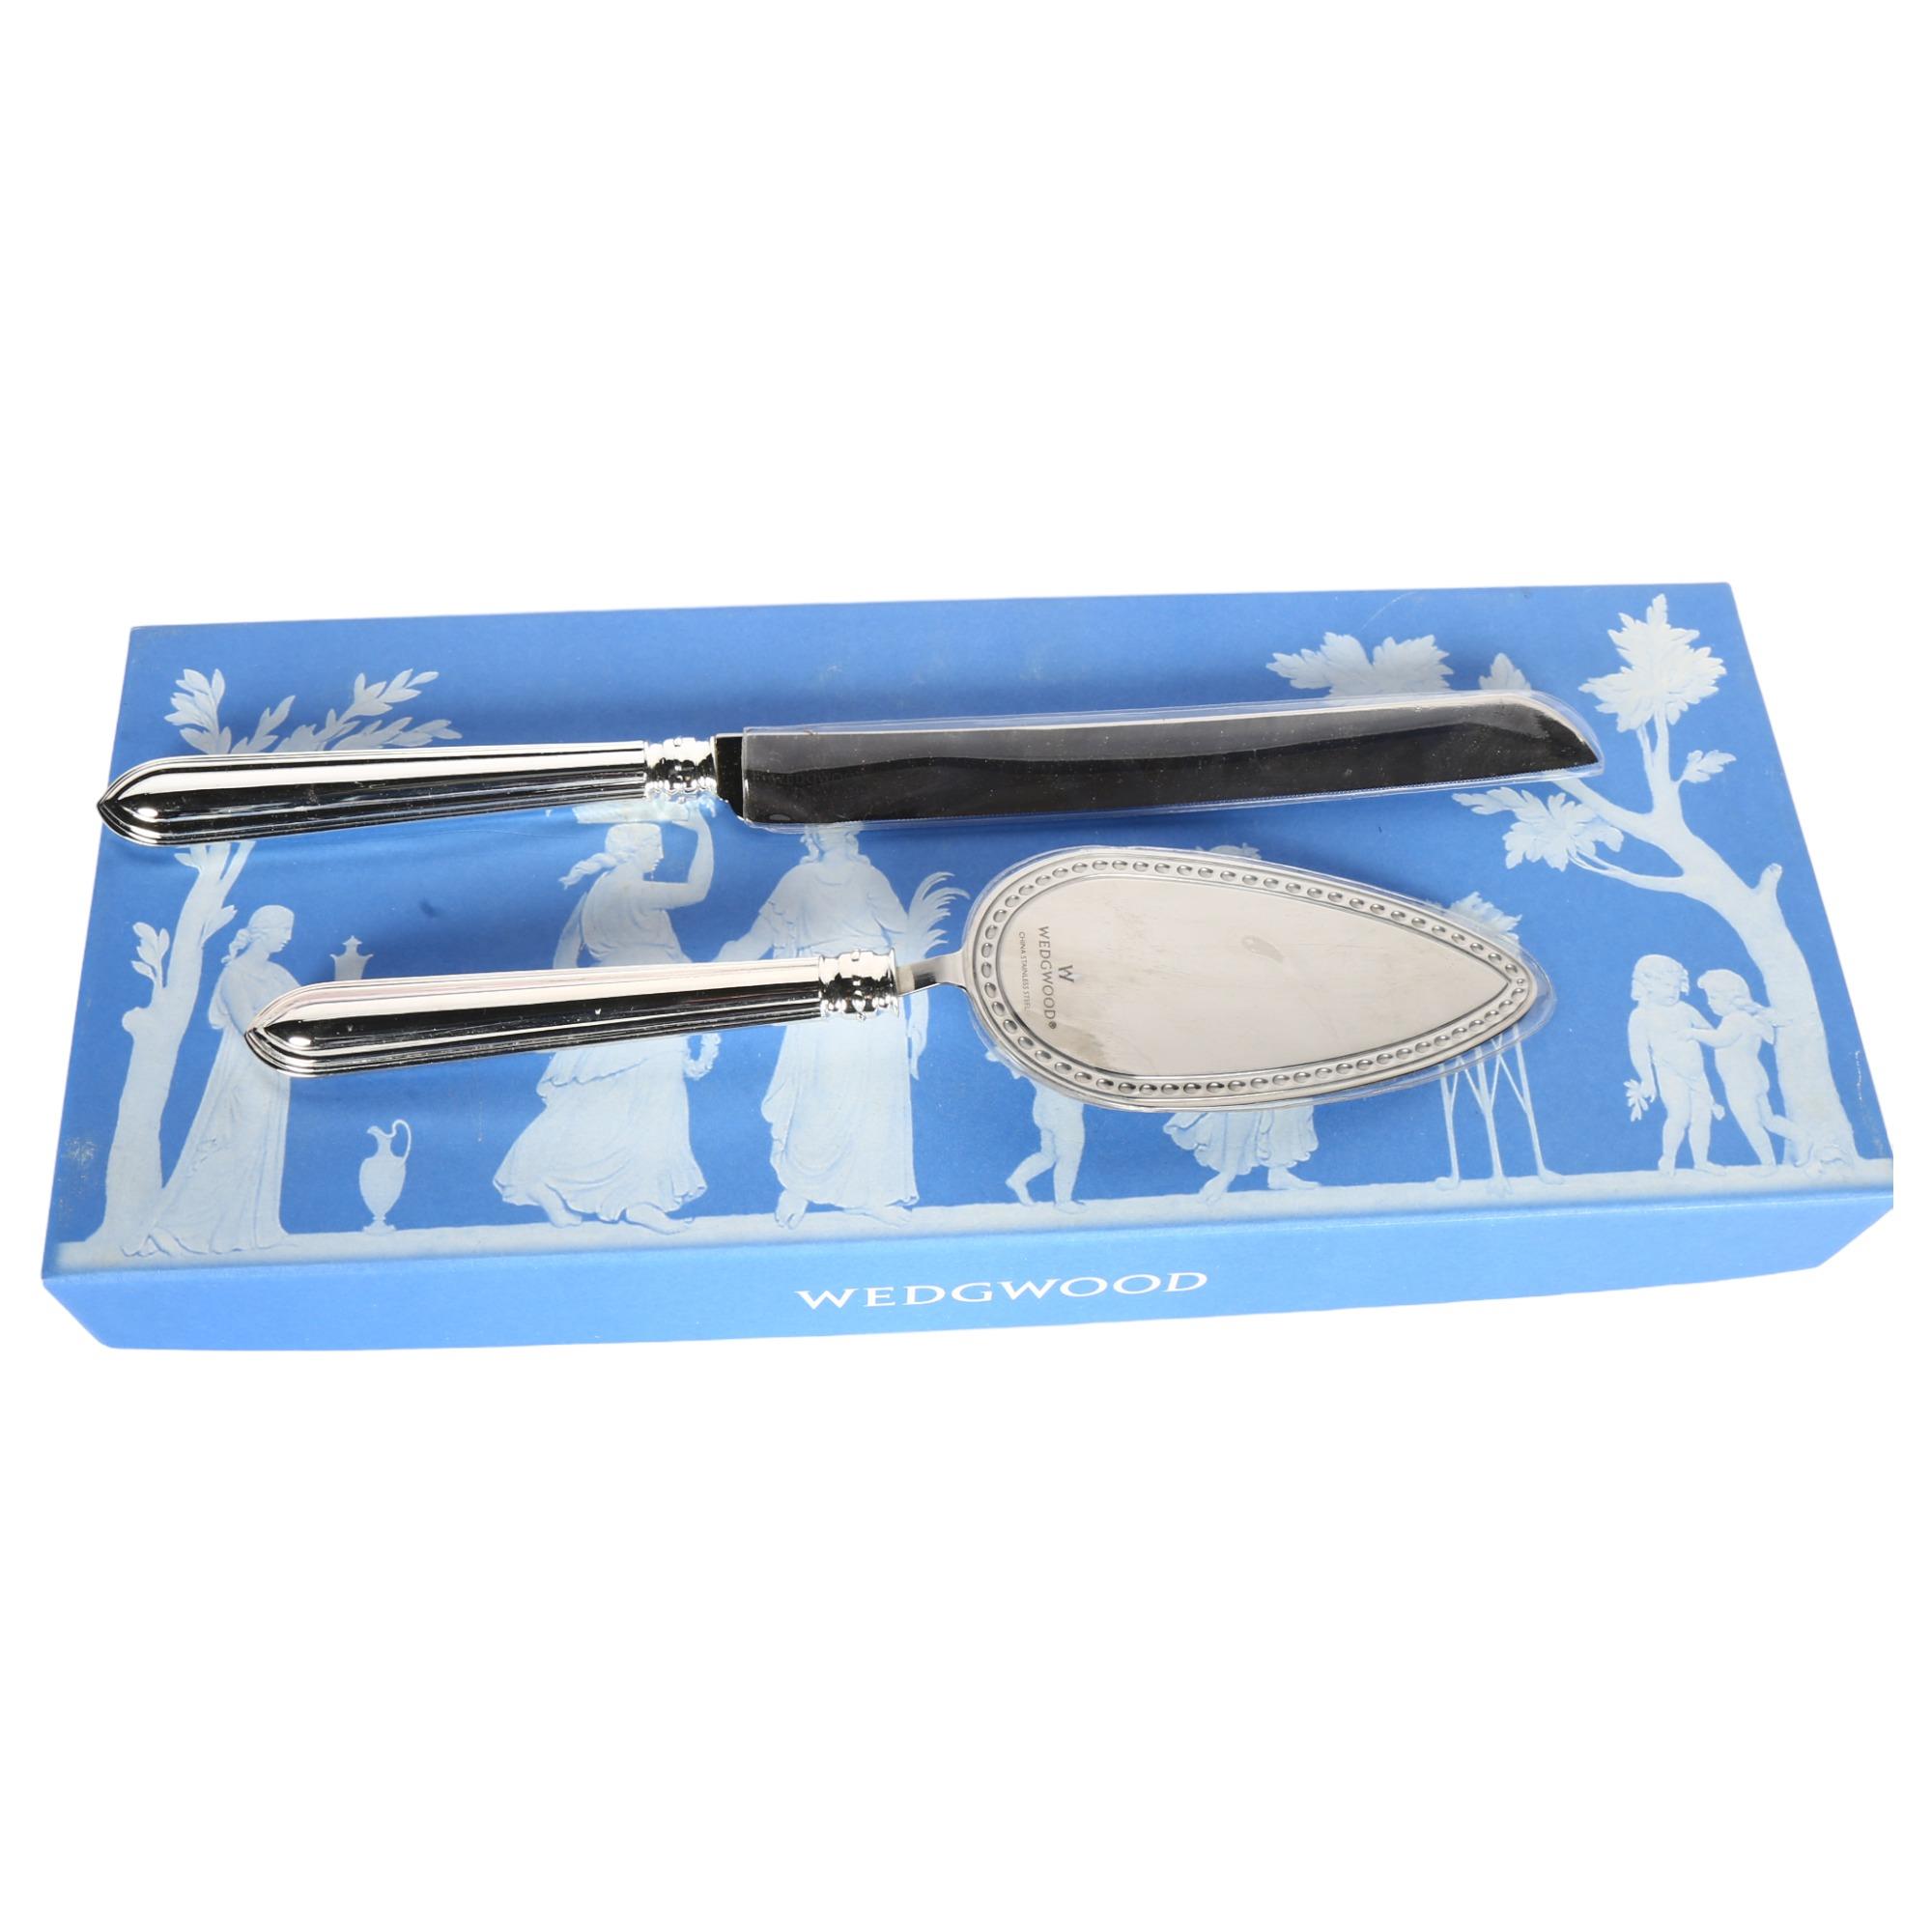 A boxed Wedgwood bread knife and cake slice